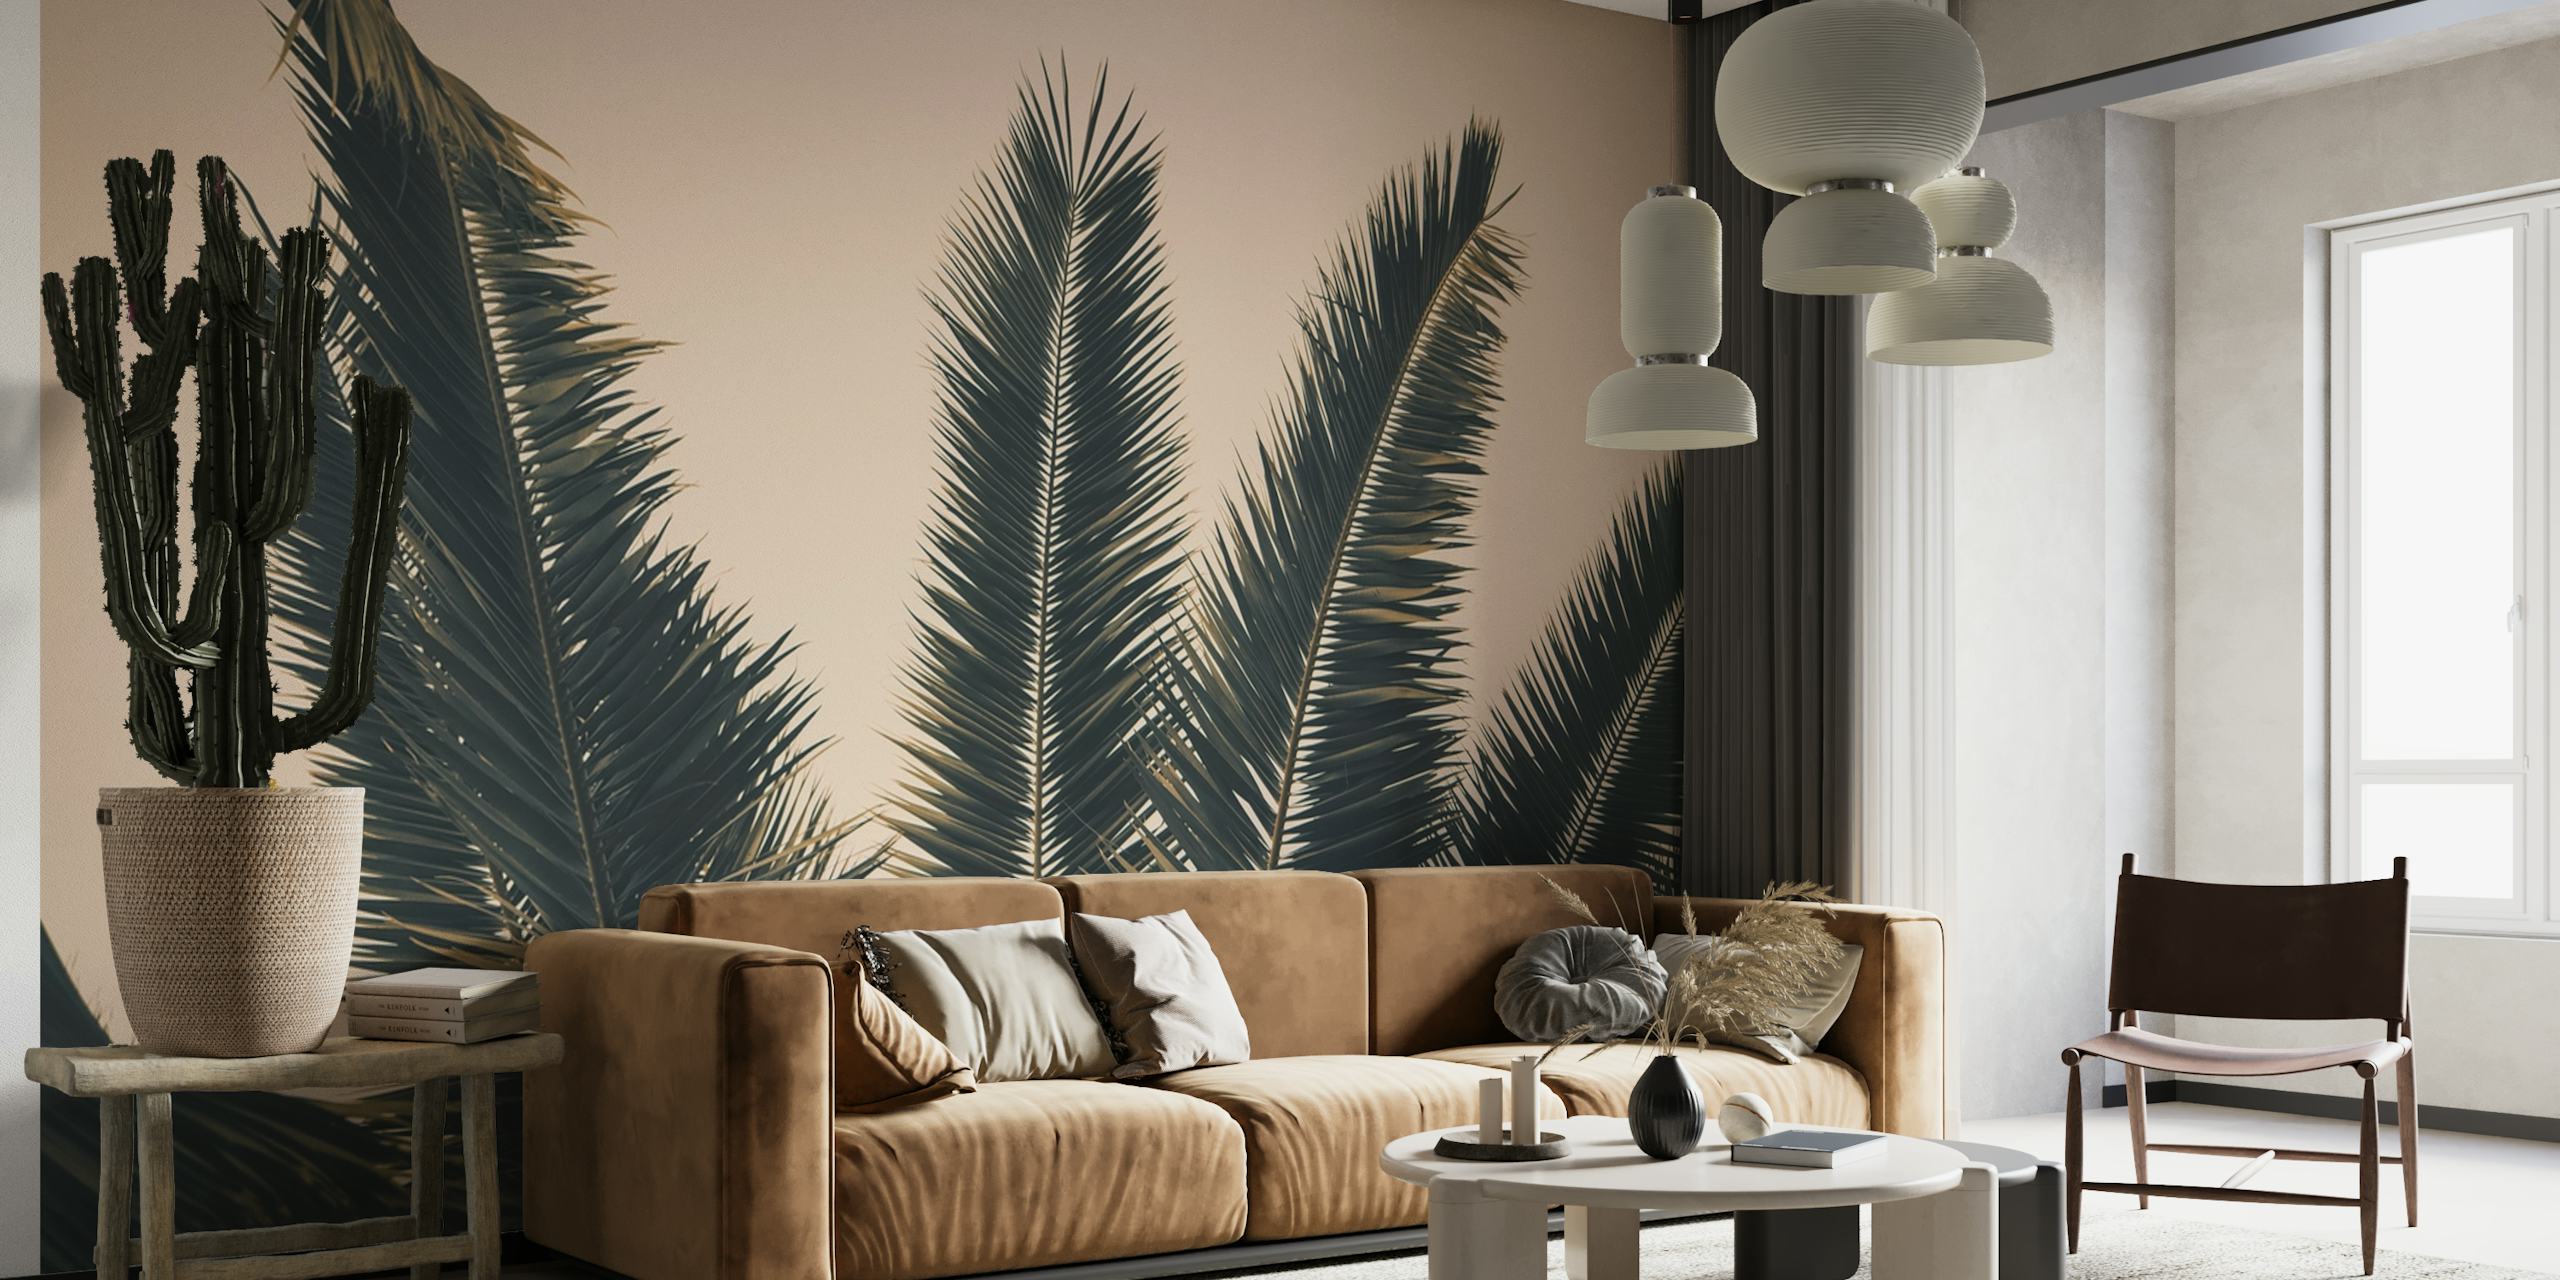 Monochrome Palm Leaves Wall Mural for a Tranquil Ambiance